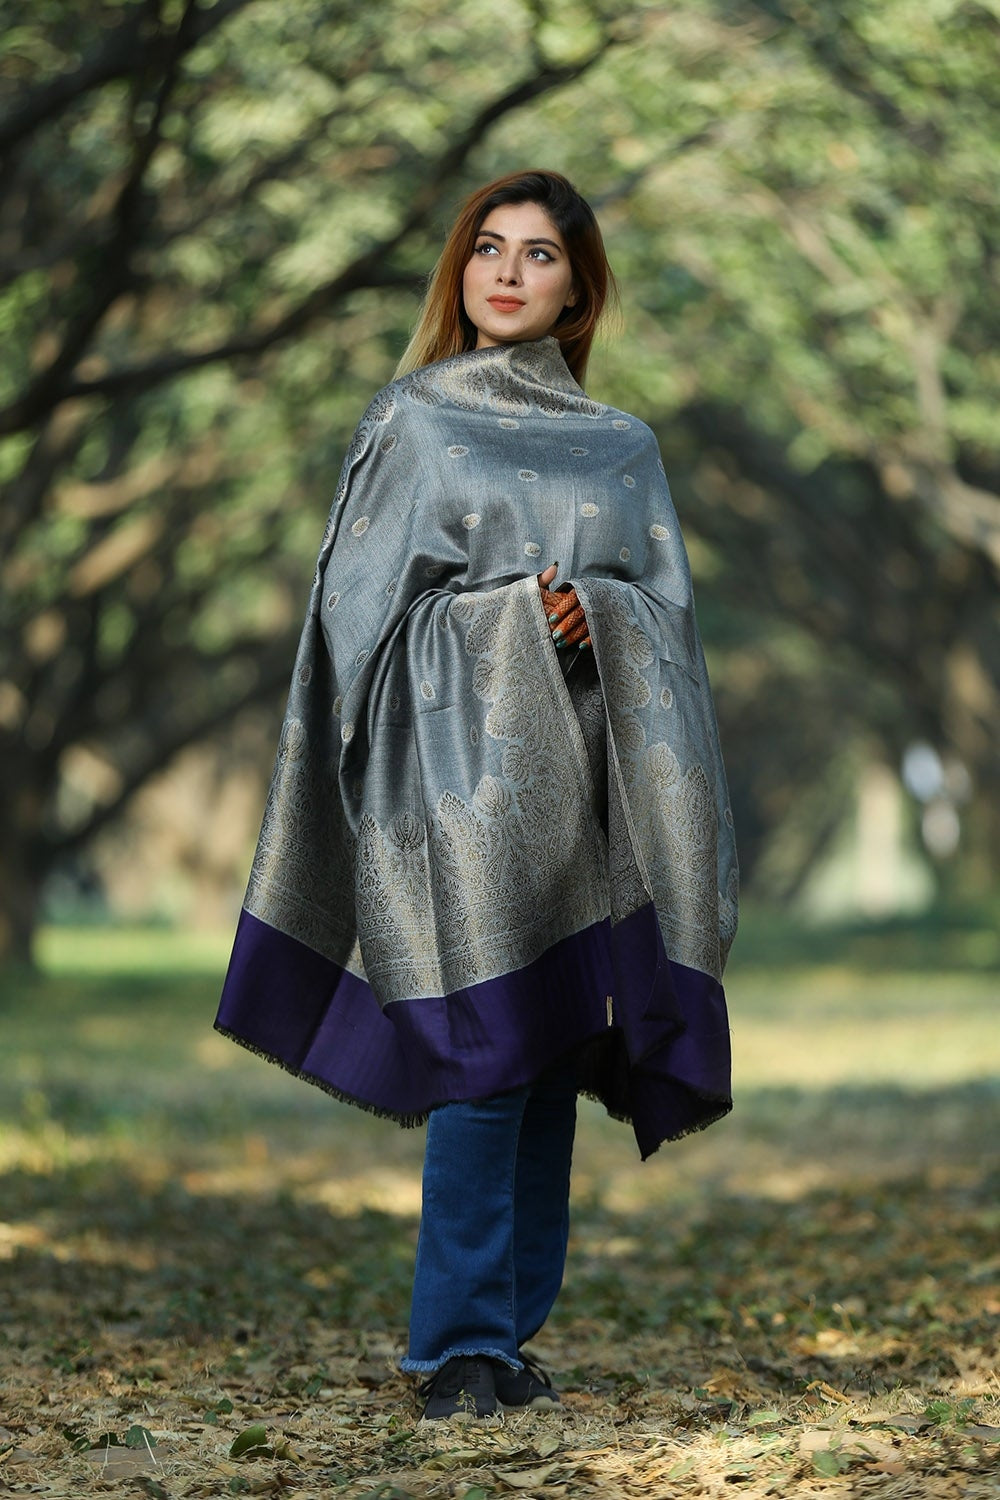 VIOLET COLOUR ZARI SHAWL DEFINES ROYAL AND LUXURIOUS